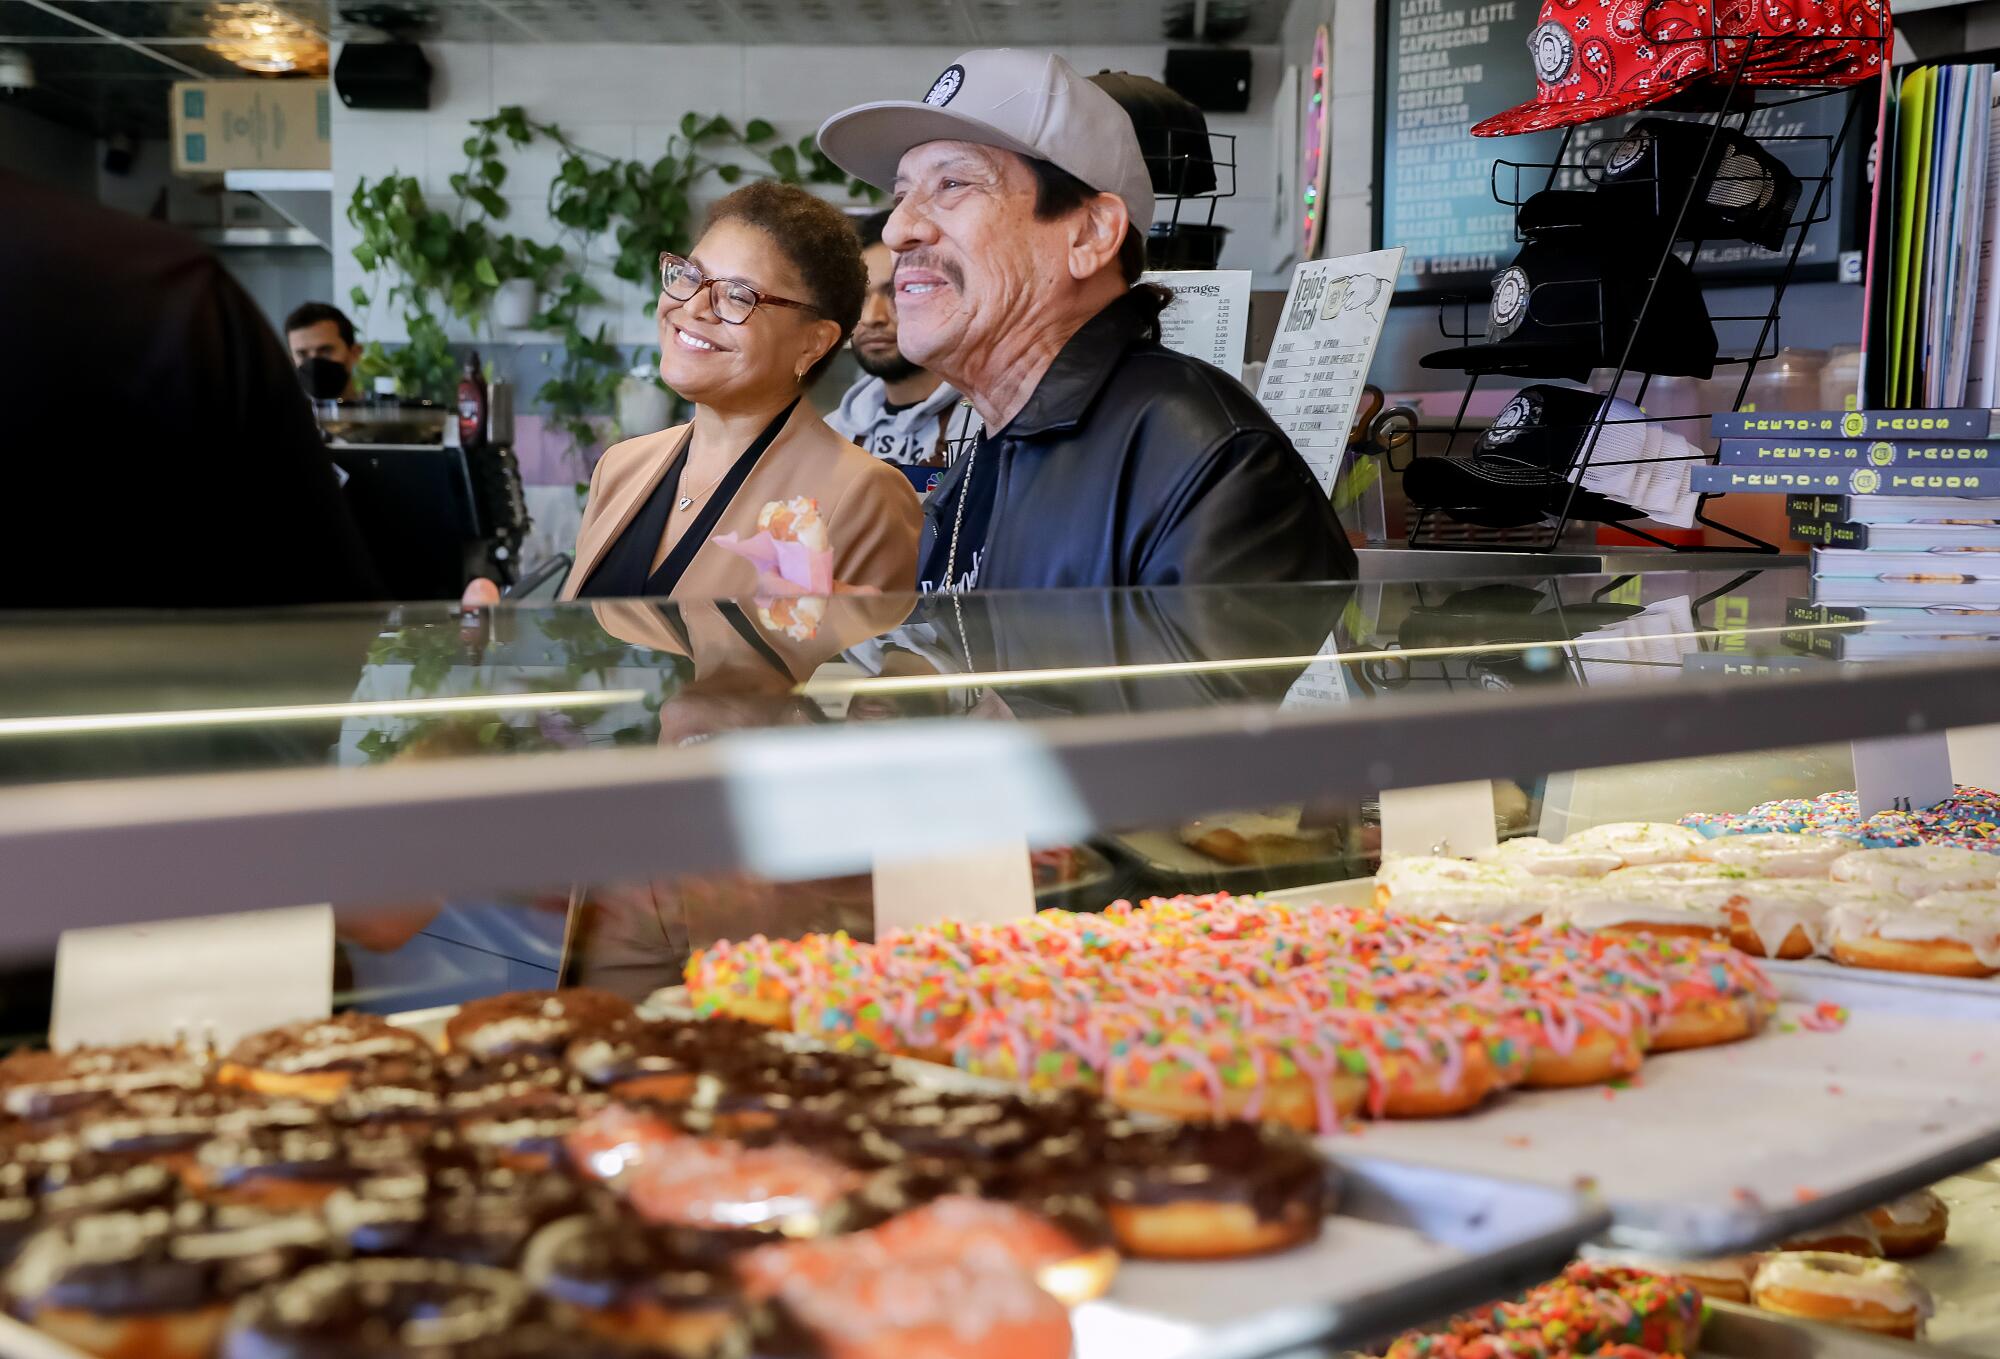 Karen Bass, left, meets with actor Danny Trejo, right, at his coffee shop.